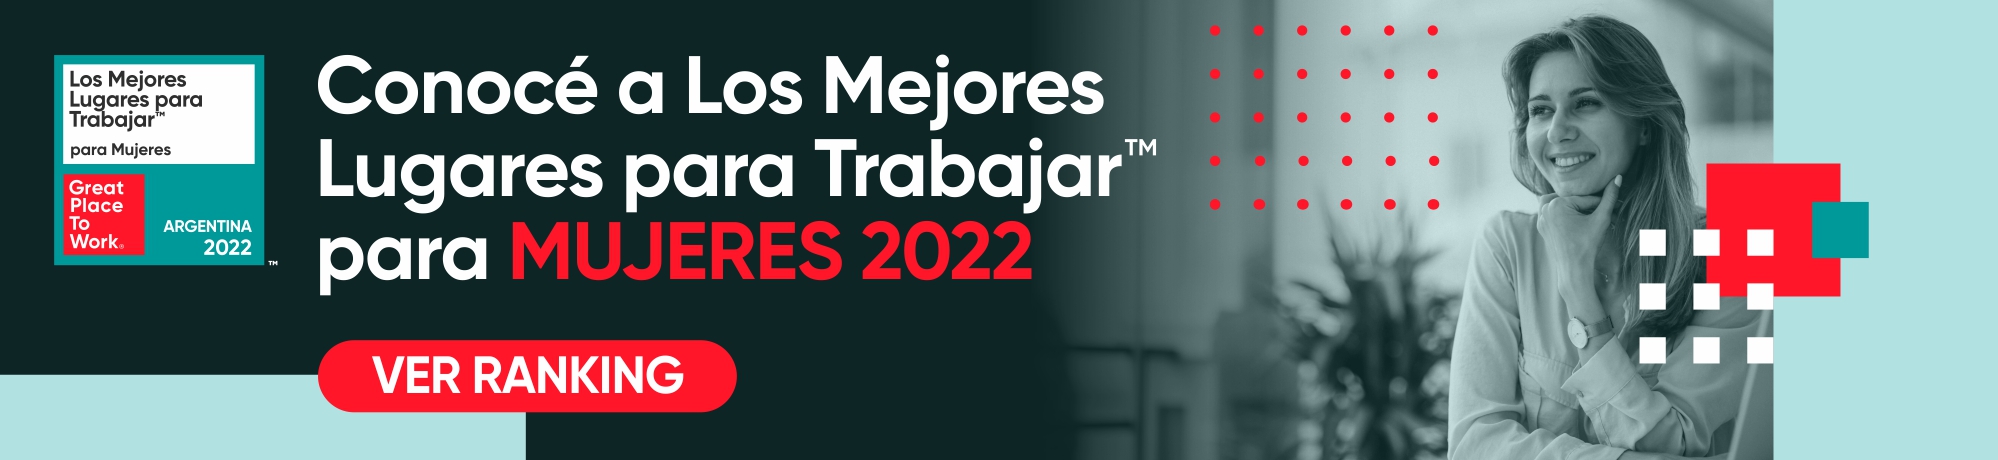 banner_home_mujeres2022